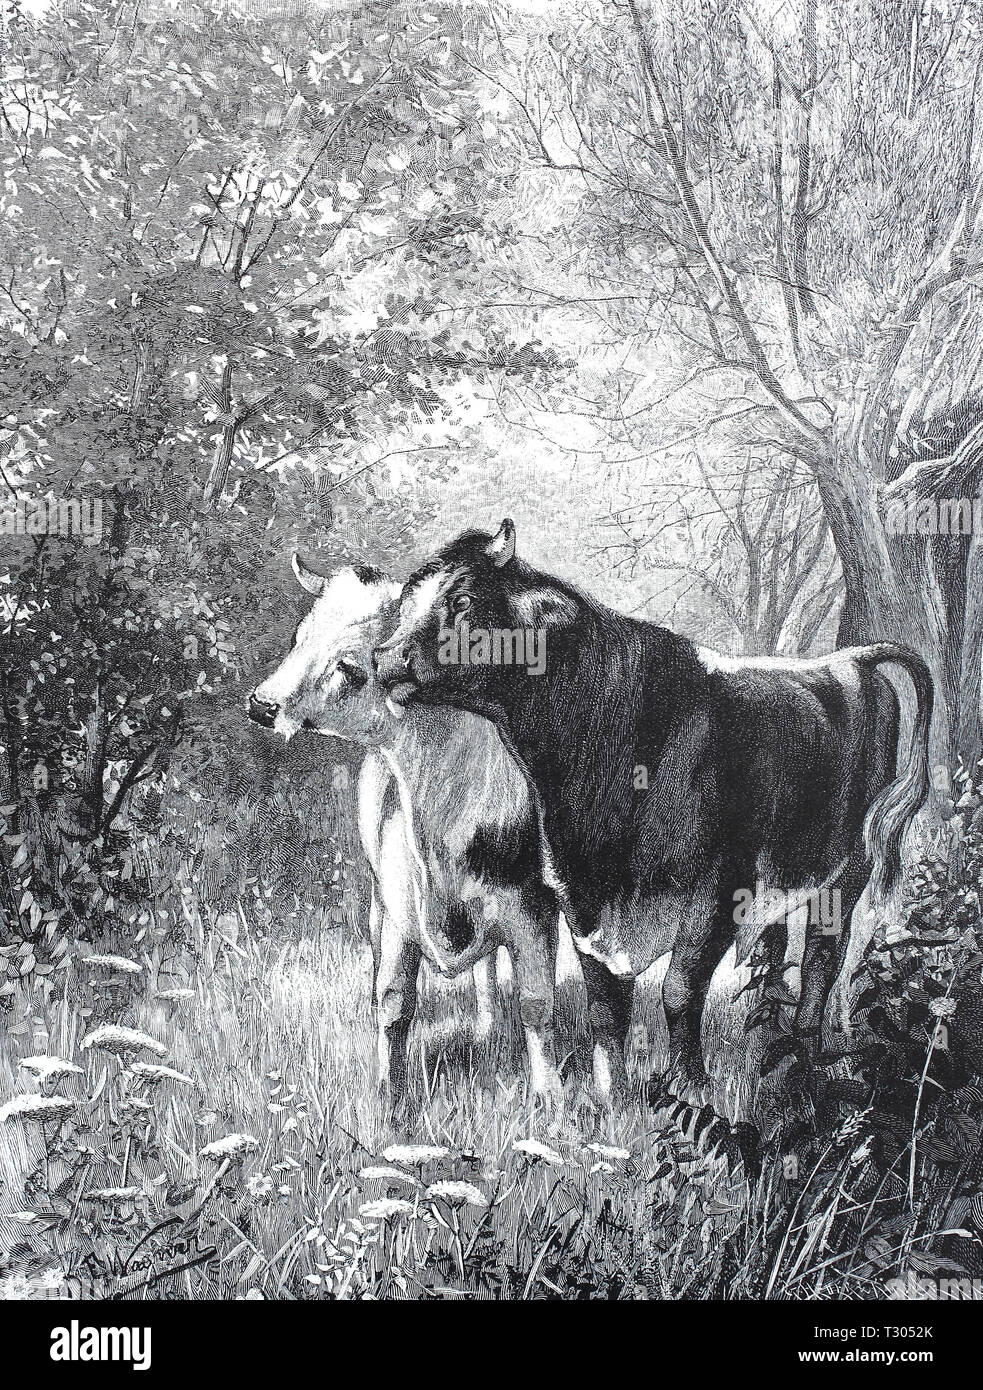 Digital improved reproduction, Lovers with cows, a bull rub itself against a cow, Liebespaar bei Kühen, ein Stier reibt sich an einer Kuh, from an original print from the 19th century Stock Photo